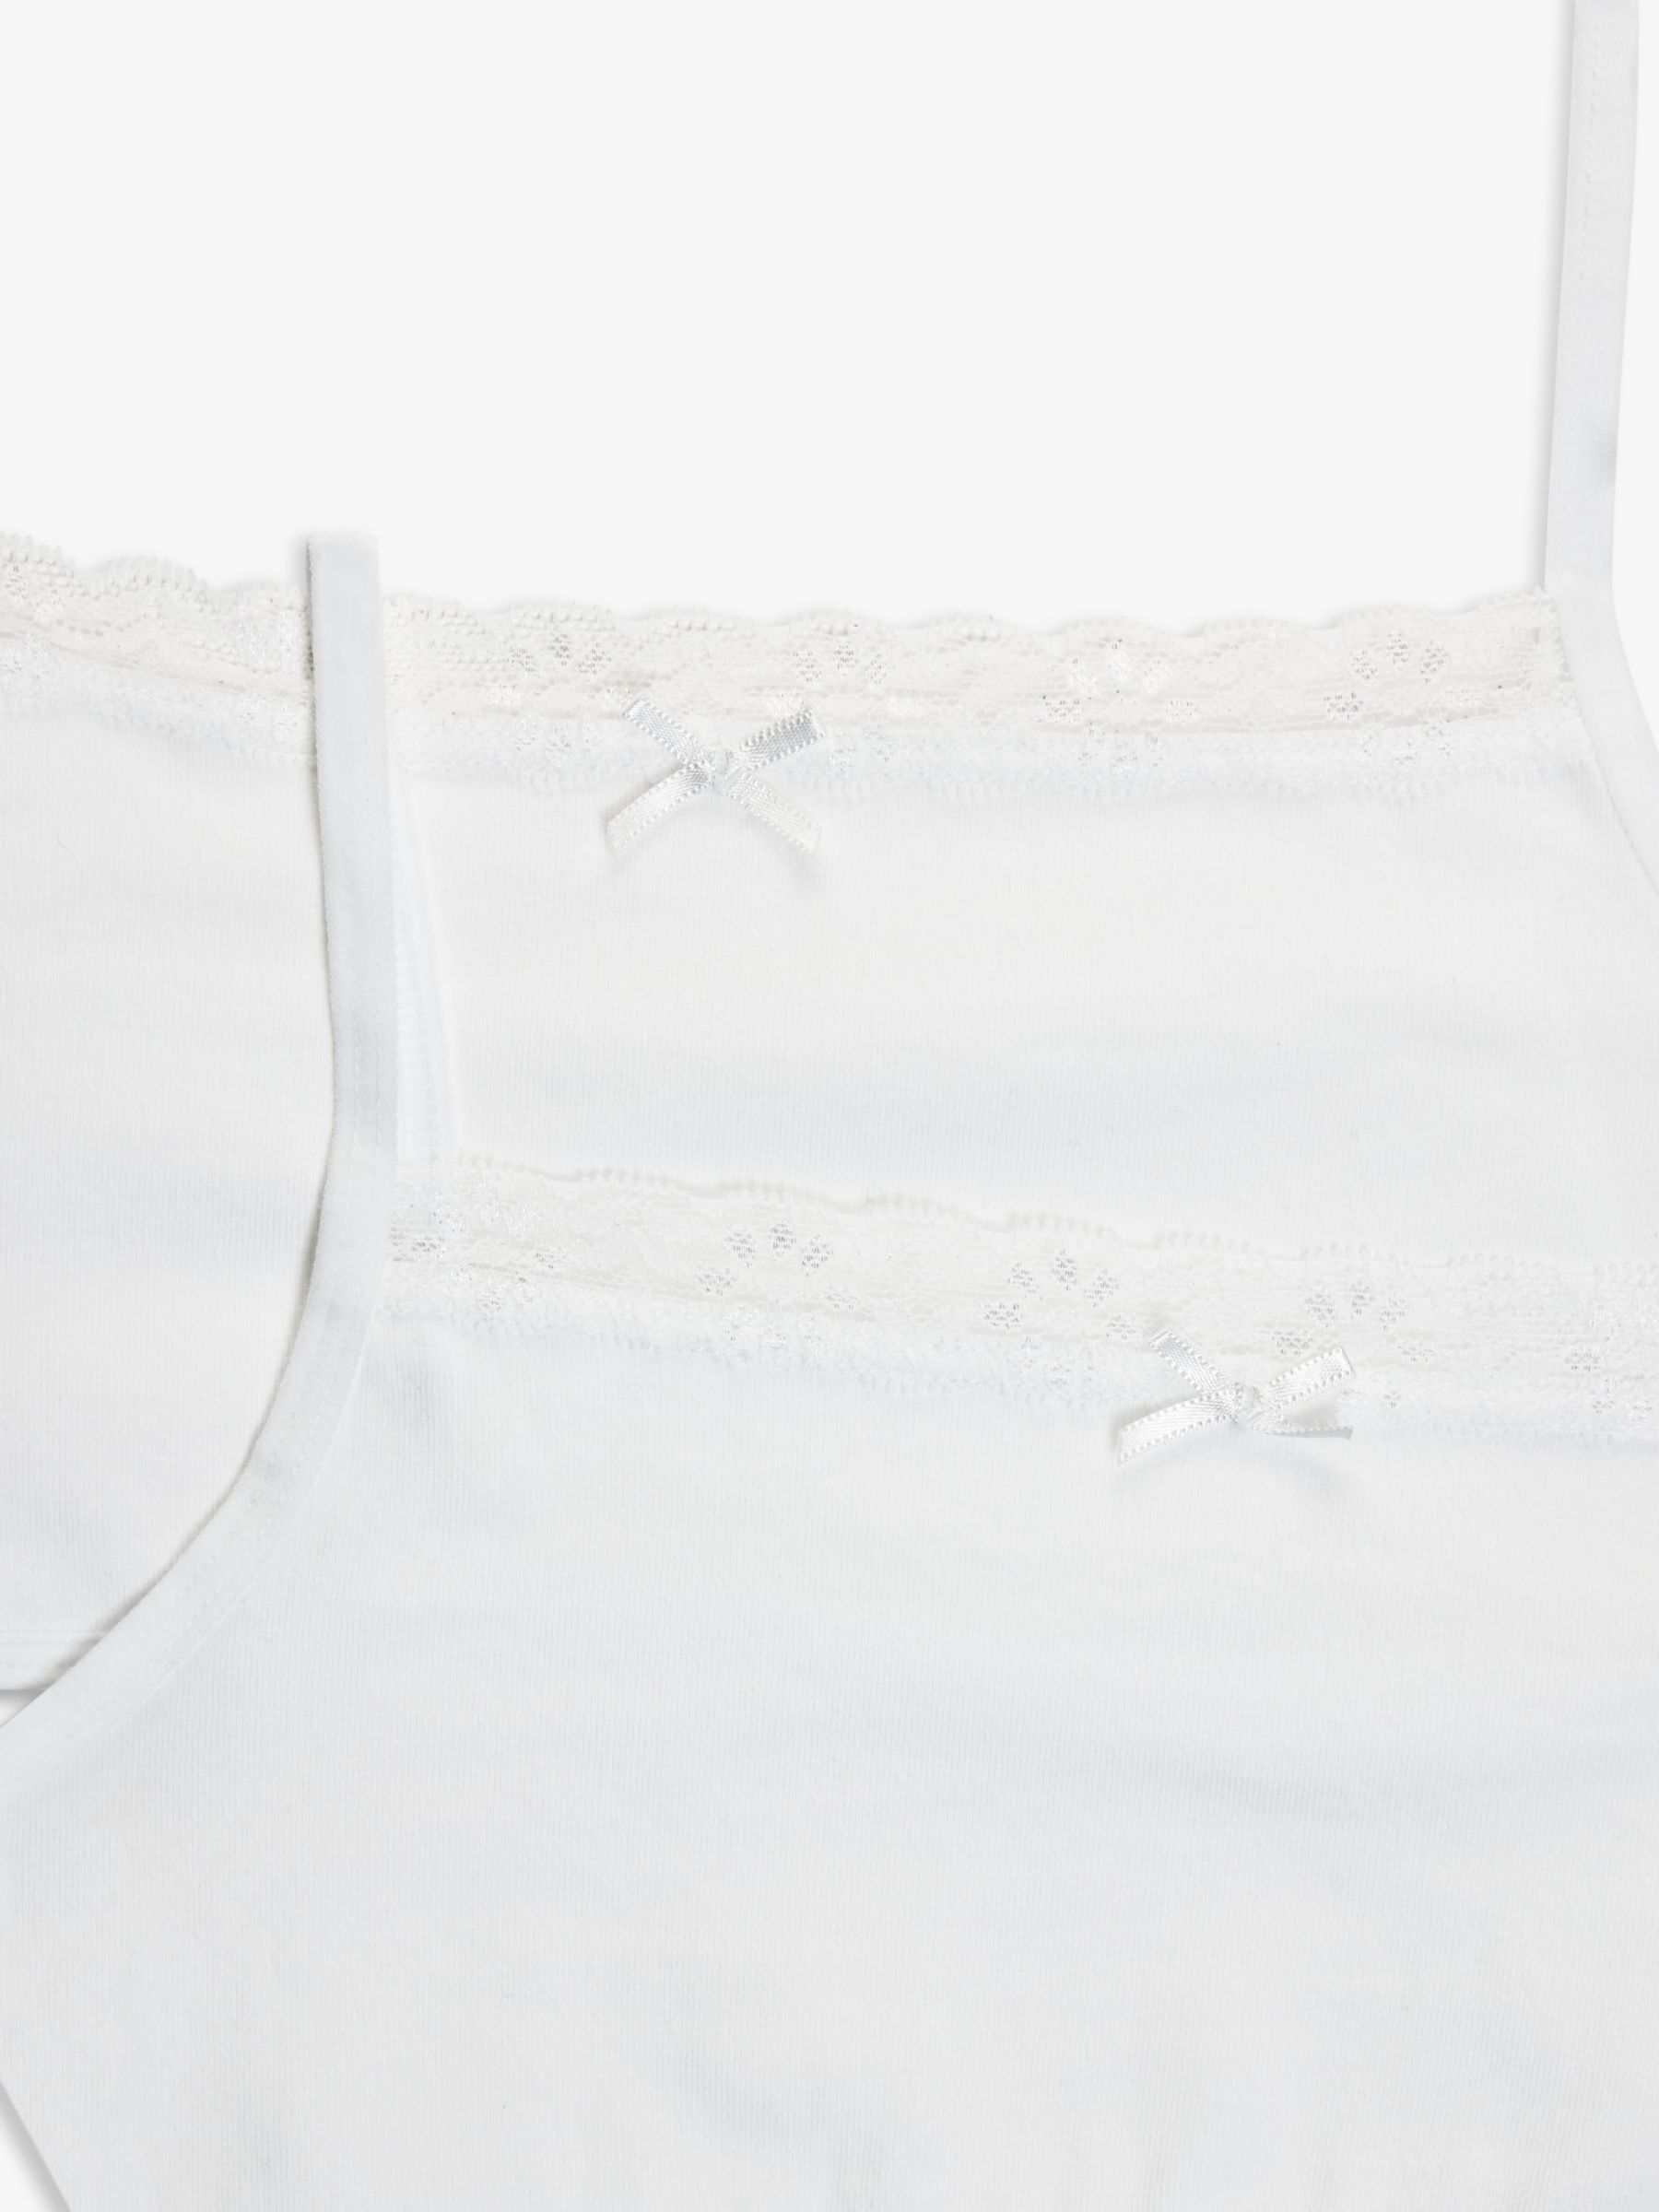 John Lewis ANYDAY Kids' Lace Crop Tops, Pack of 2, White at John Lewis &  Partners